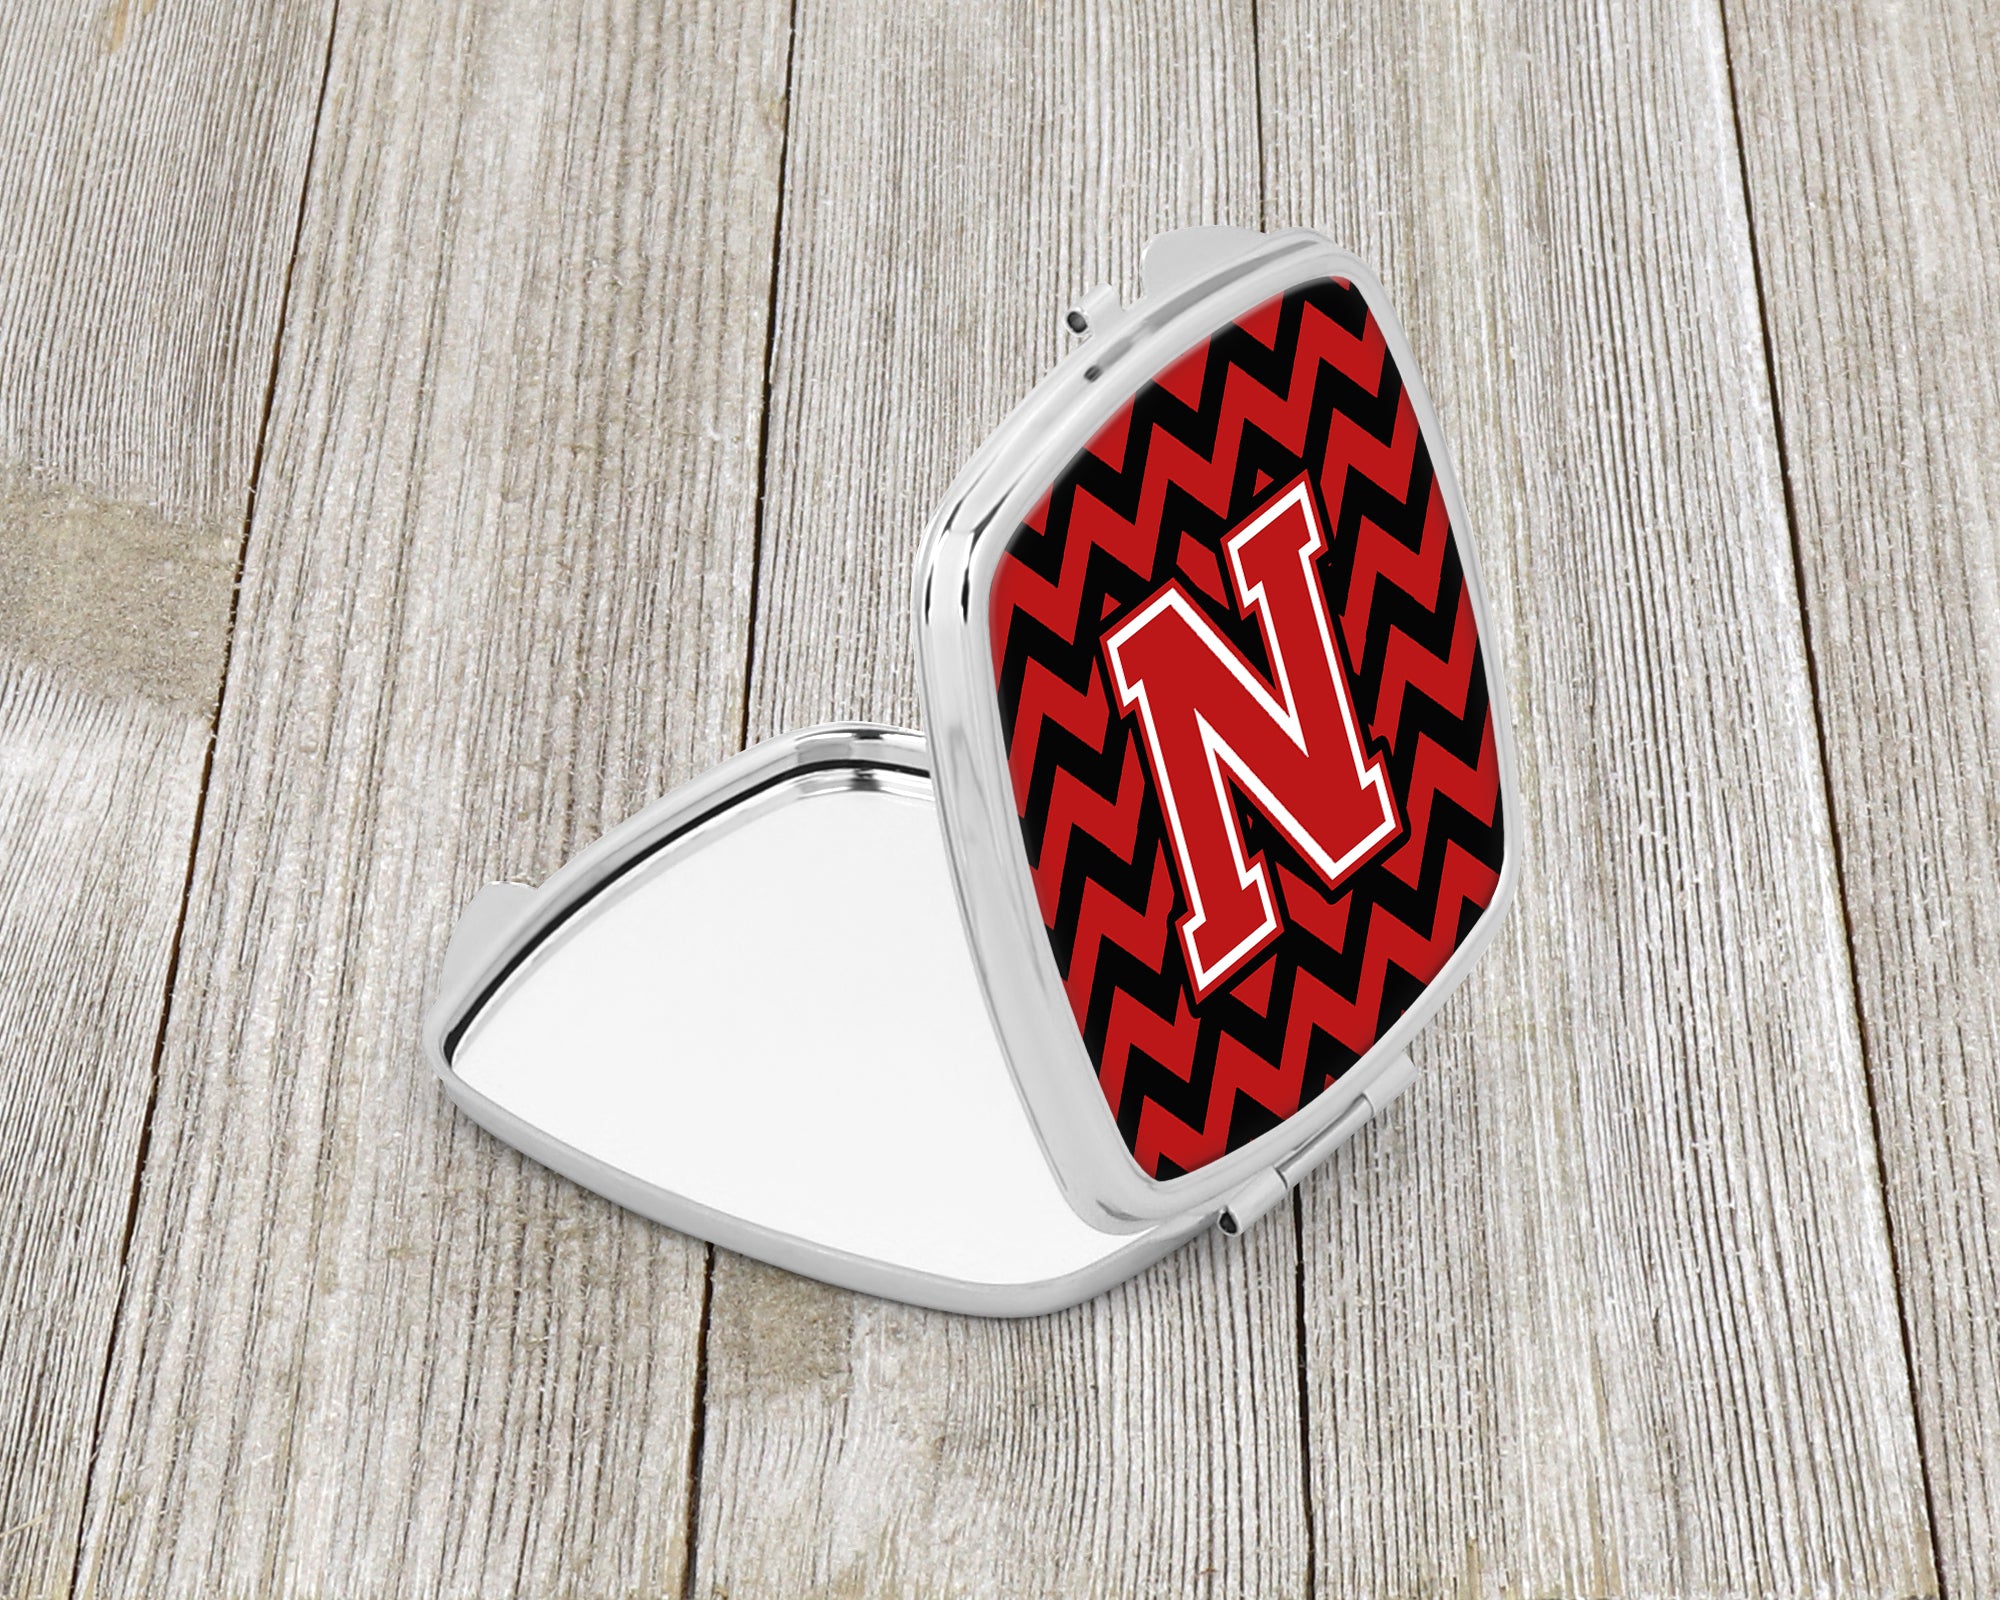 Letter N Chevron Black and Red   Compact Mirror CJ1047-NSCM